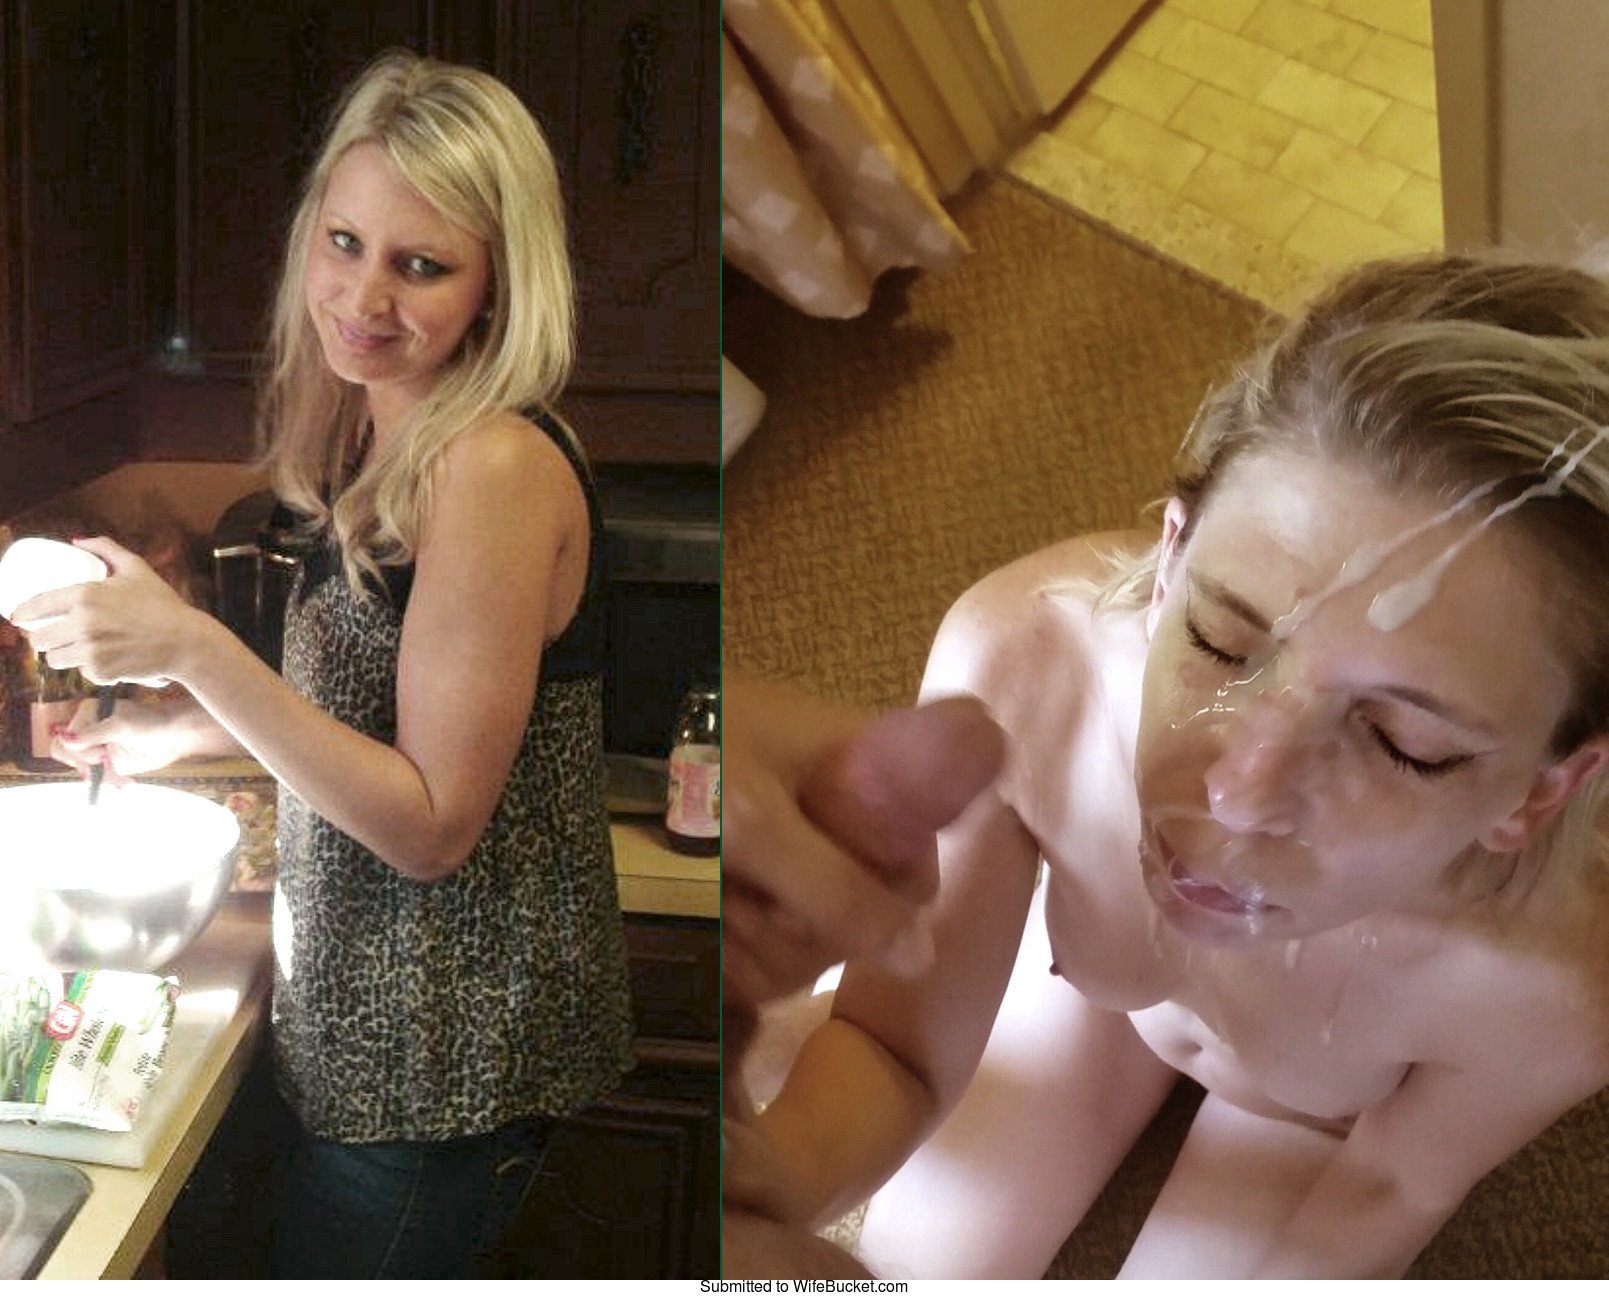 Before And After Bukkake - before-after pics â€“ WifeBucket | Offical MILF Blog